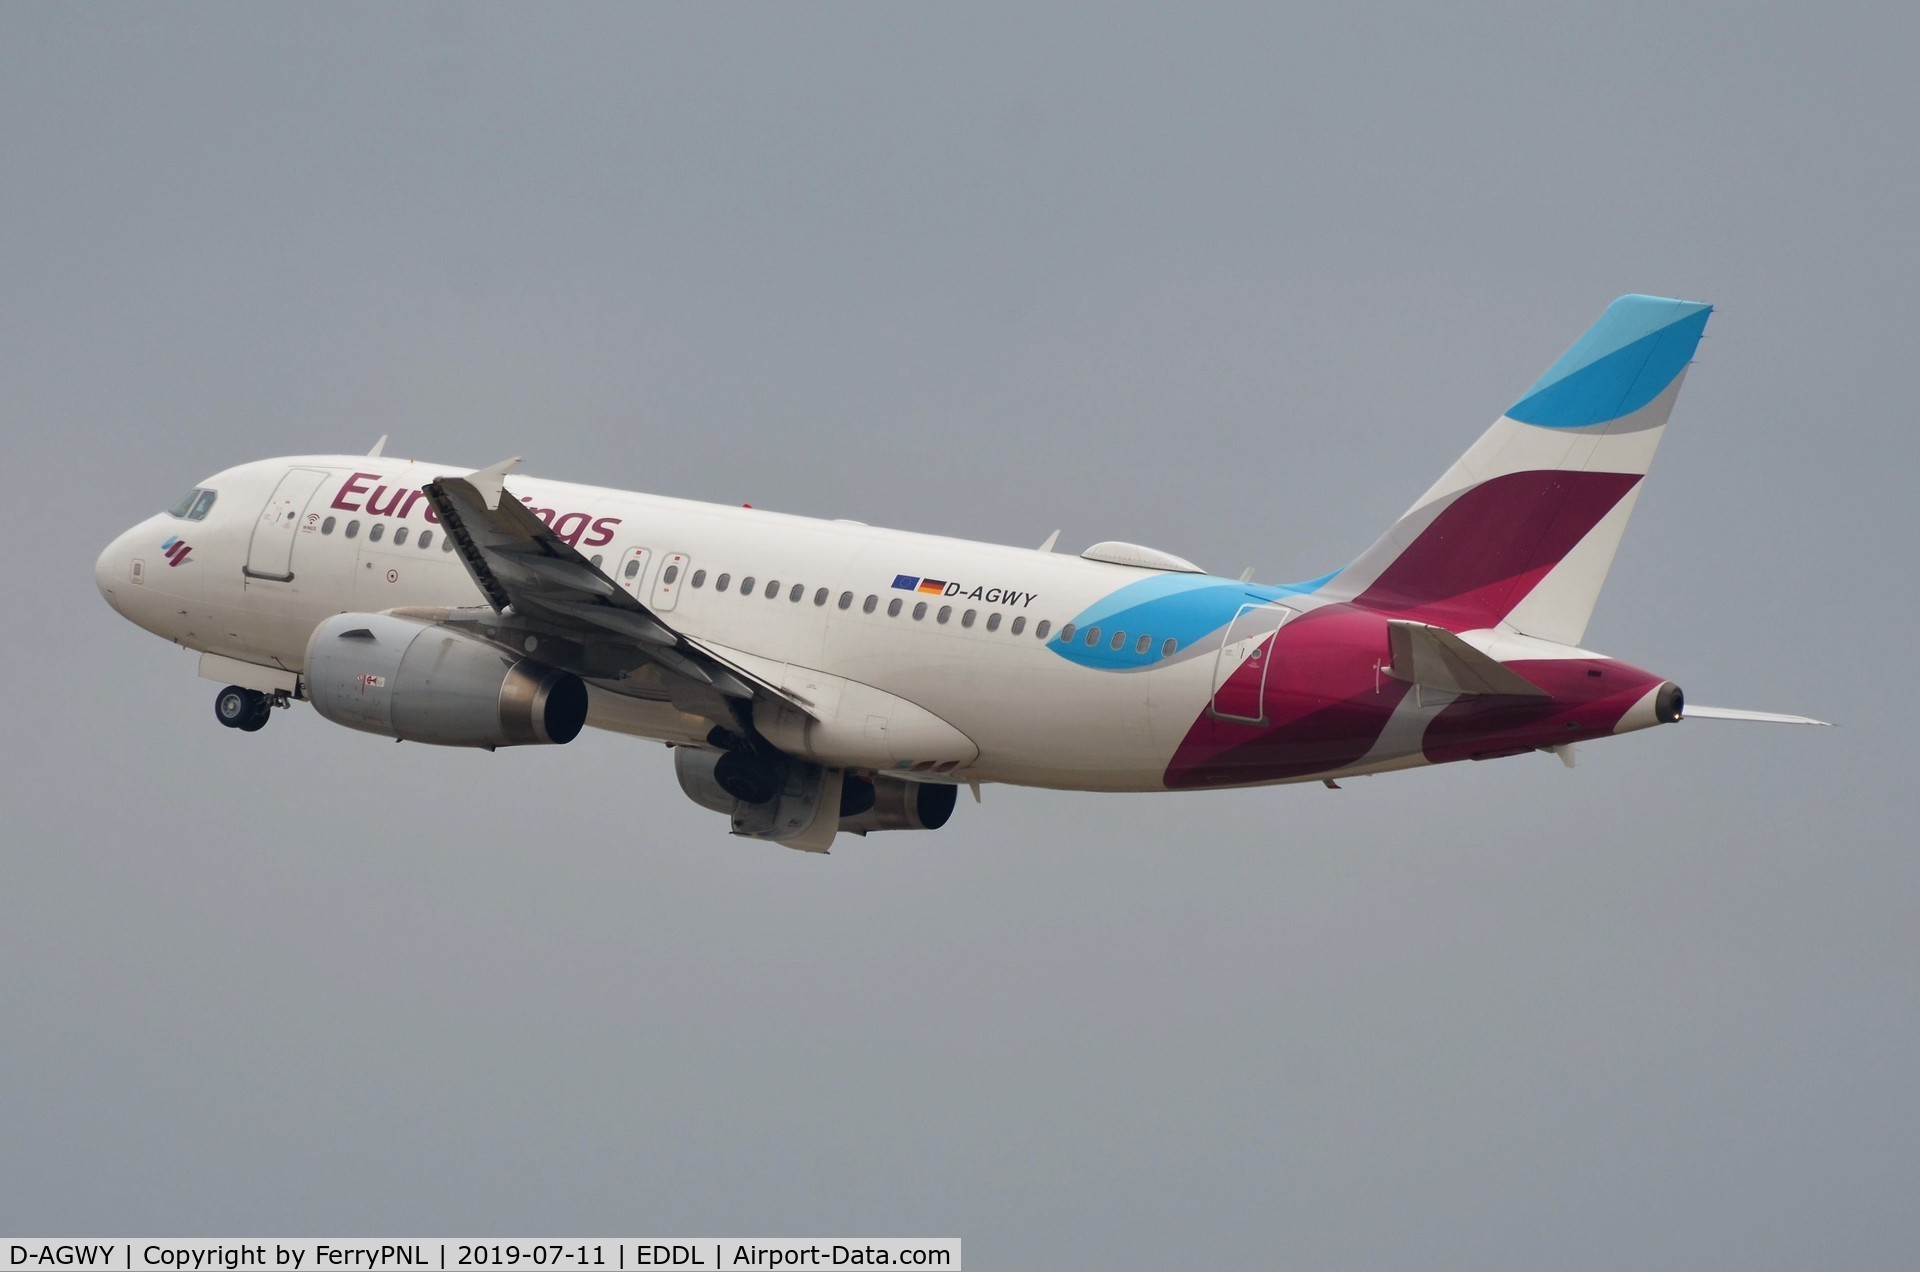 D-AGWY, 2013 Airbus A319-132 C/N 5941, Eurowings A319 taking-off.